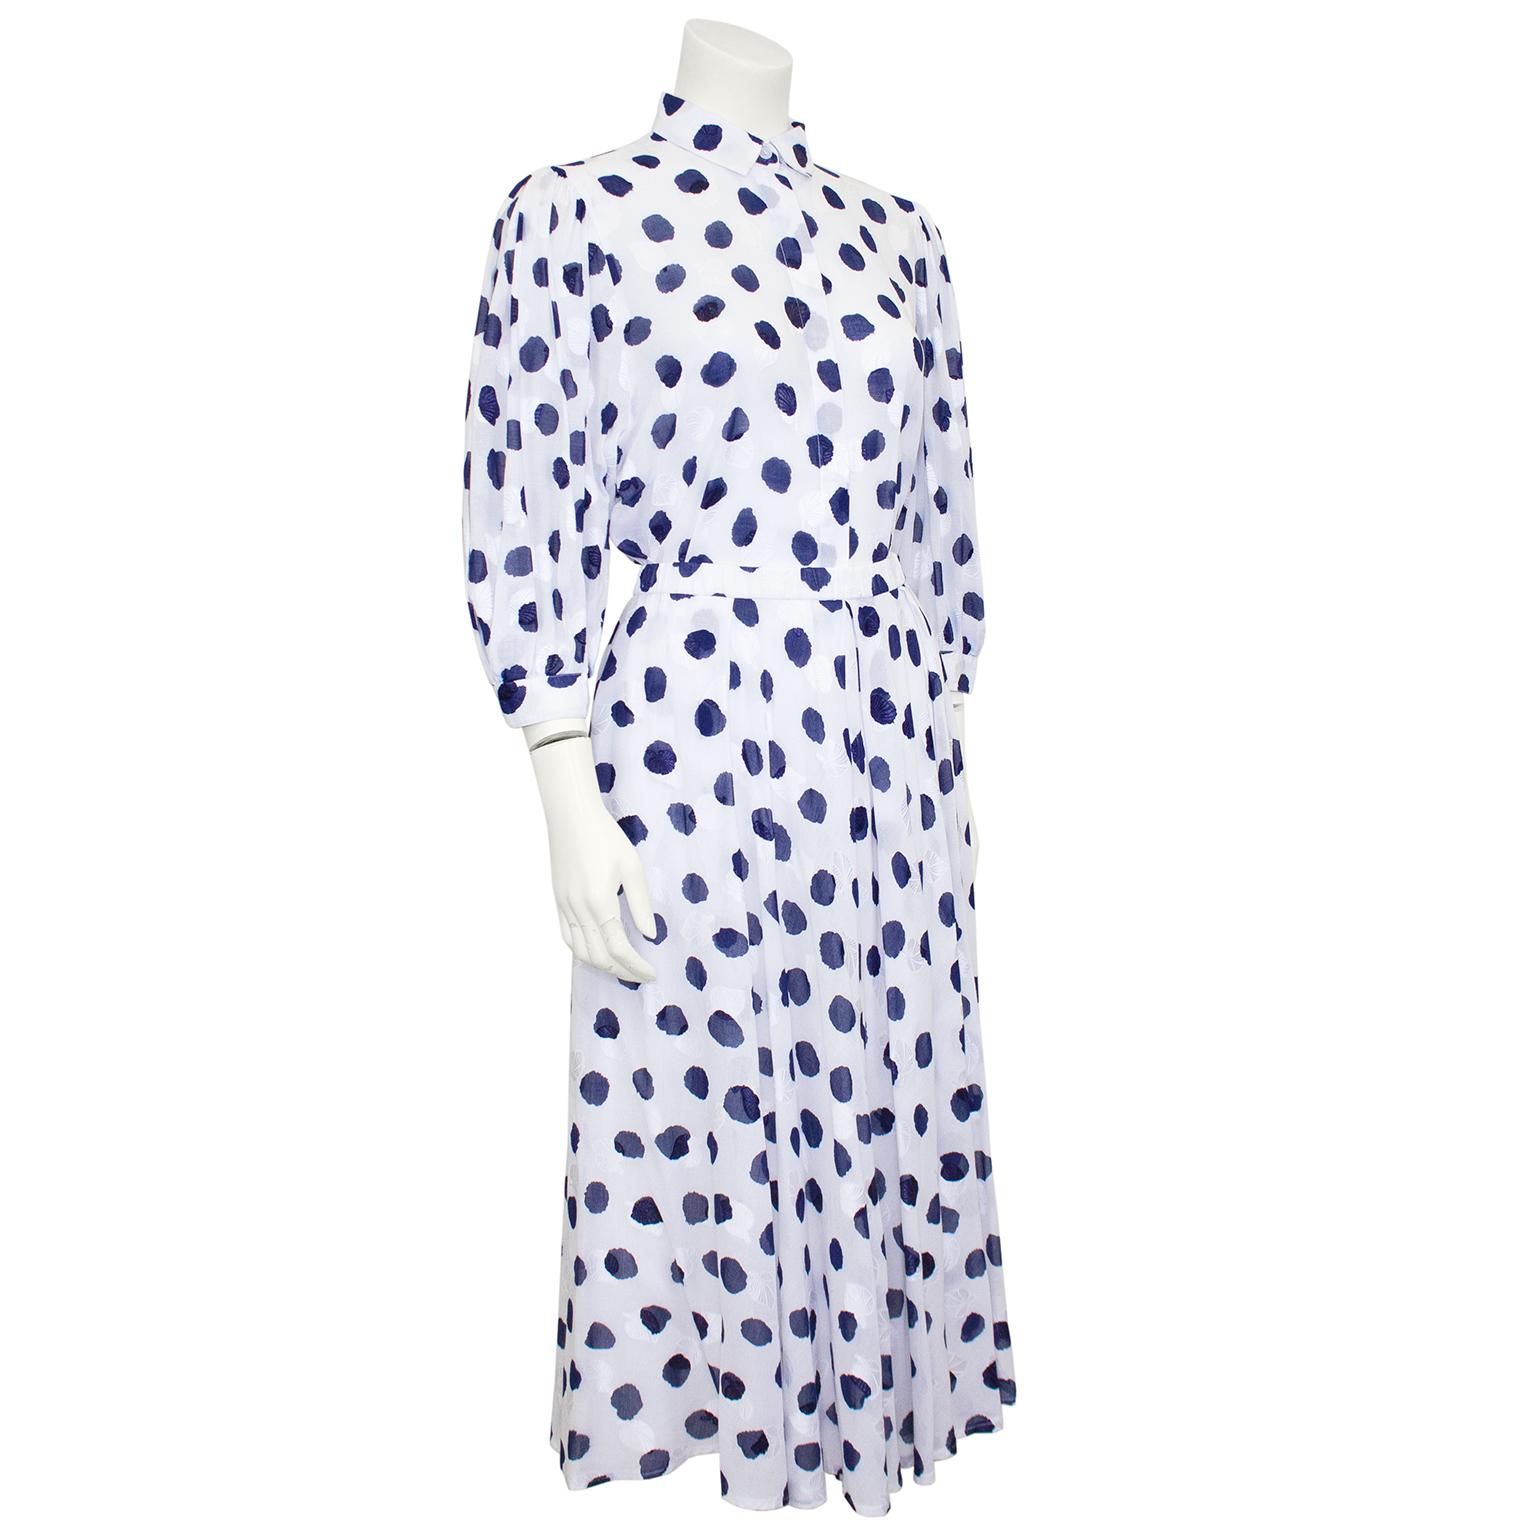 Very pretty Akris shirt and skirt set from the 1990s. Beautiful white cotton with an all over royal blue abstract polka dot print that looks hand painted. The set is further detailed with subtle white embroidered leaves. Blouse features gathered